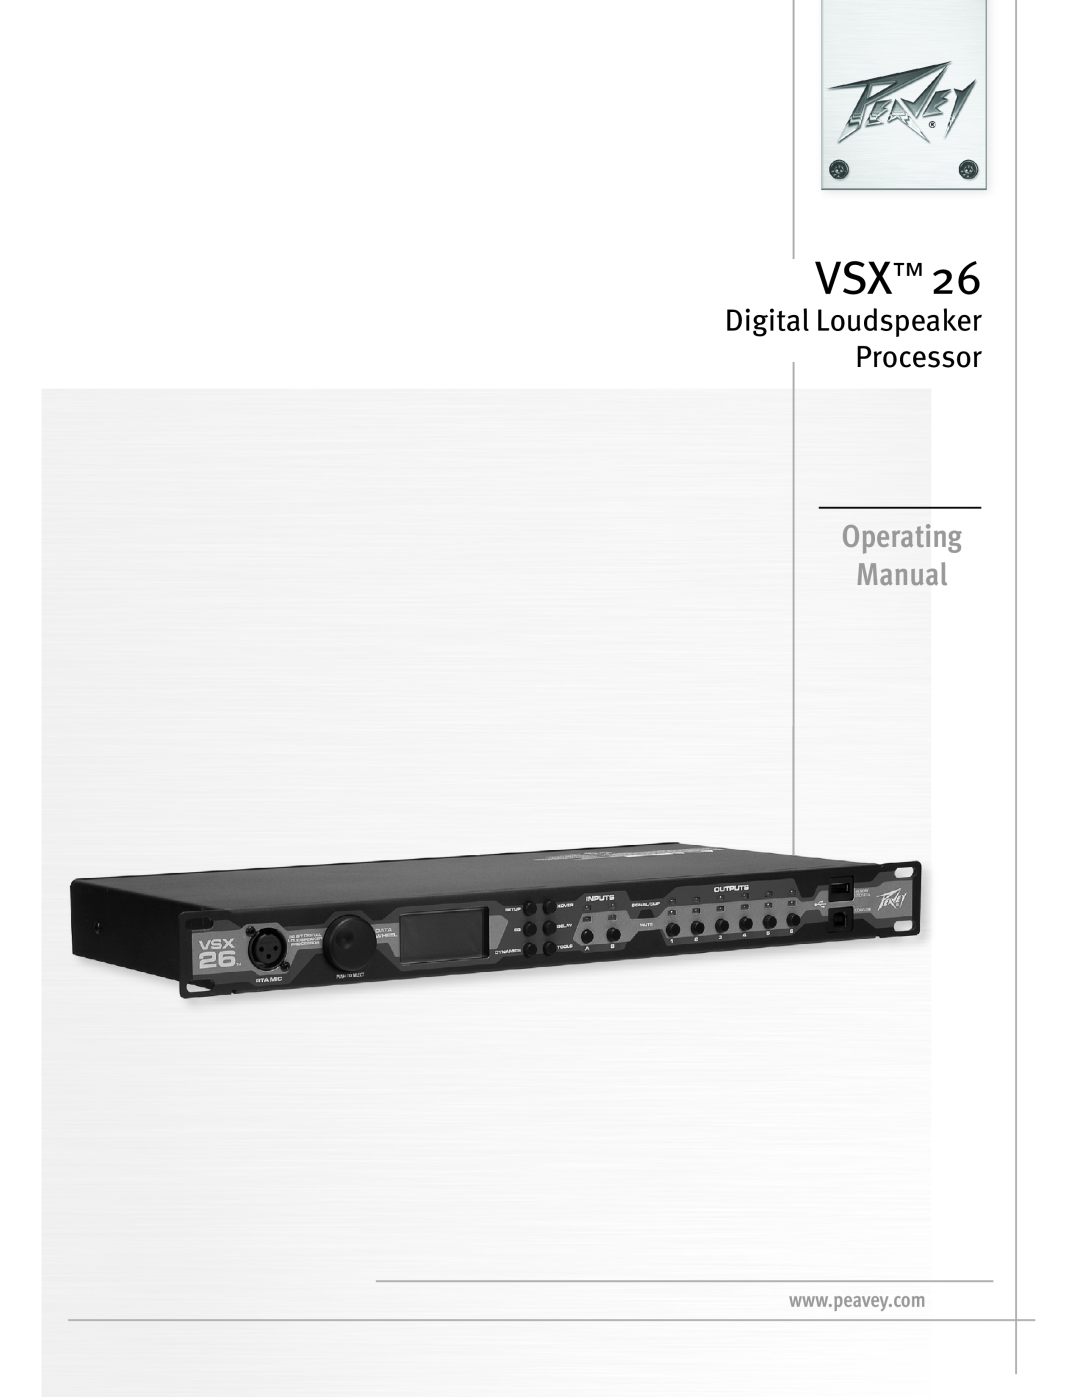 Peavey VSX 26, 48 manual Single VR112 Neo Cabinet w/118 Sub, Crossover settings, EQ after crossover 